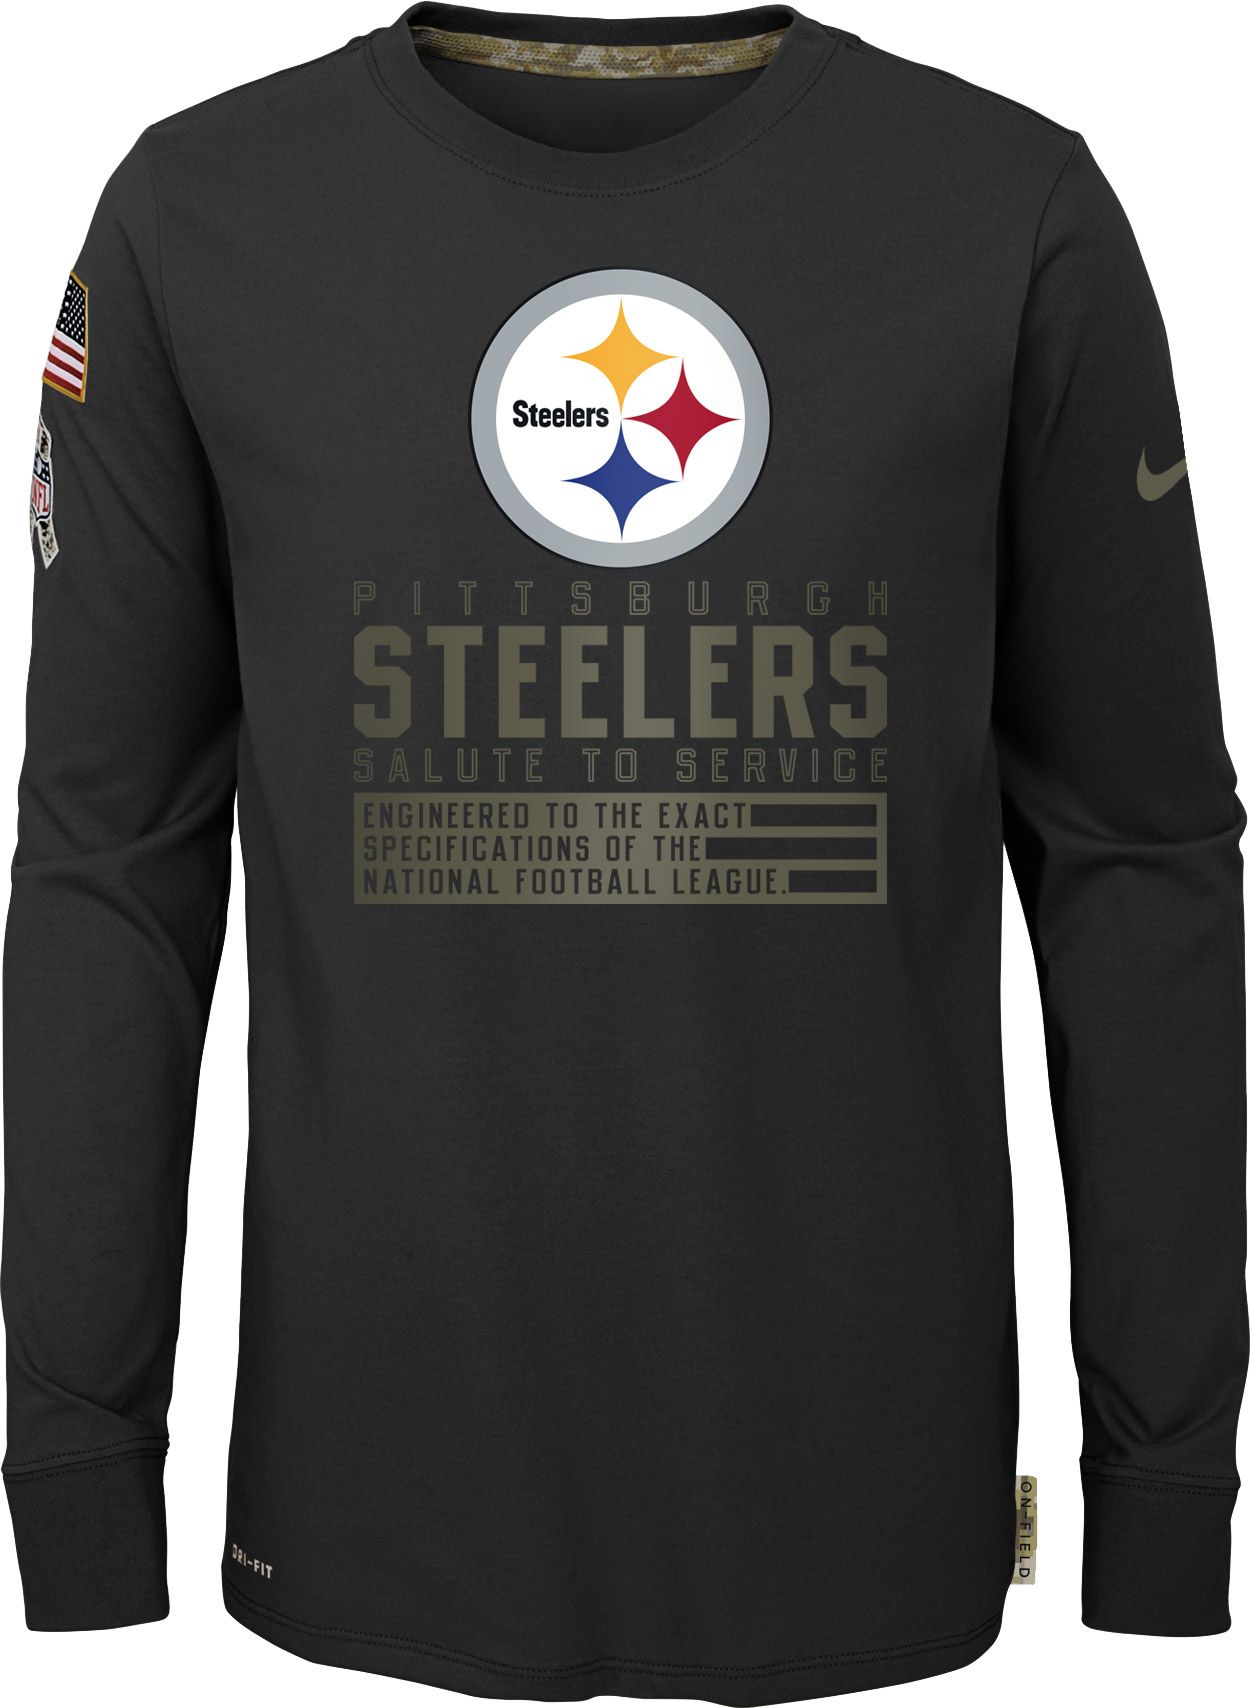 steelers salute to service t shirt